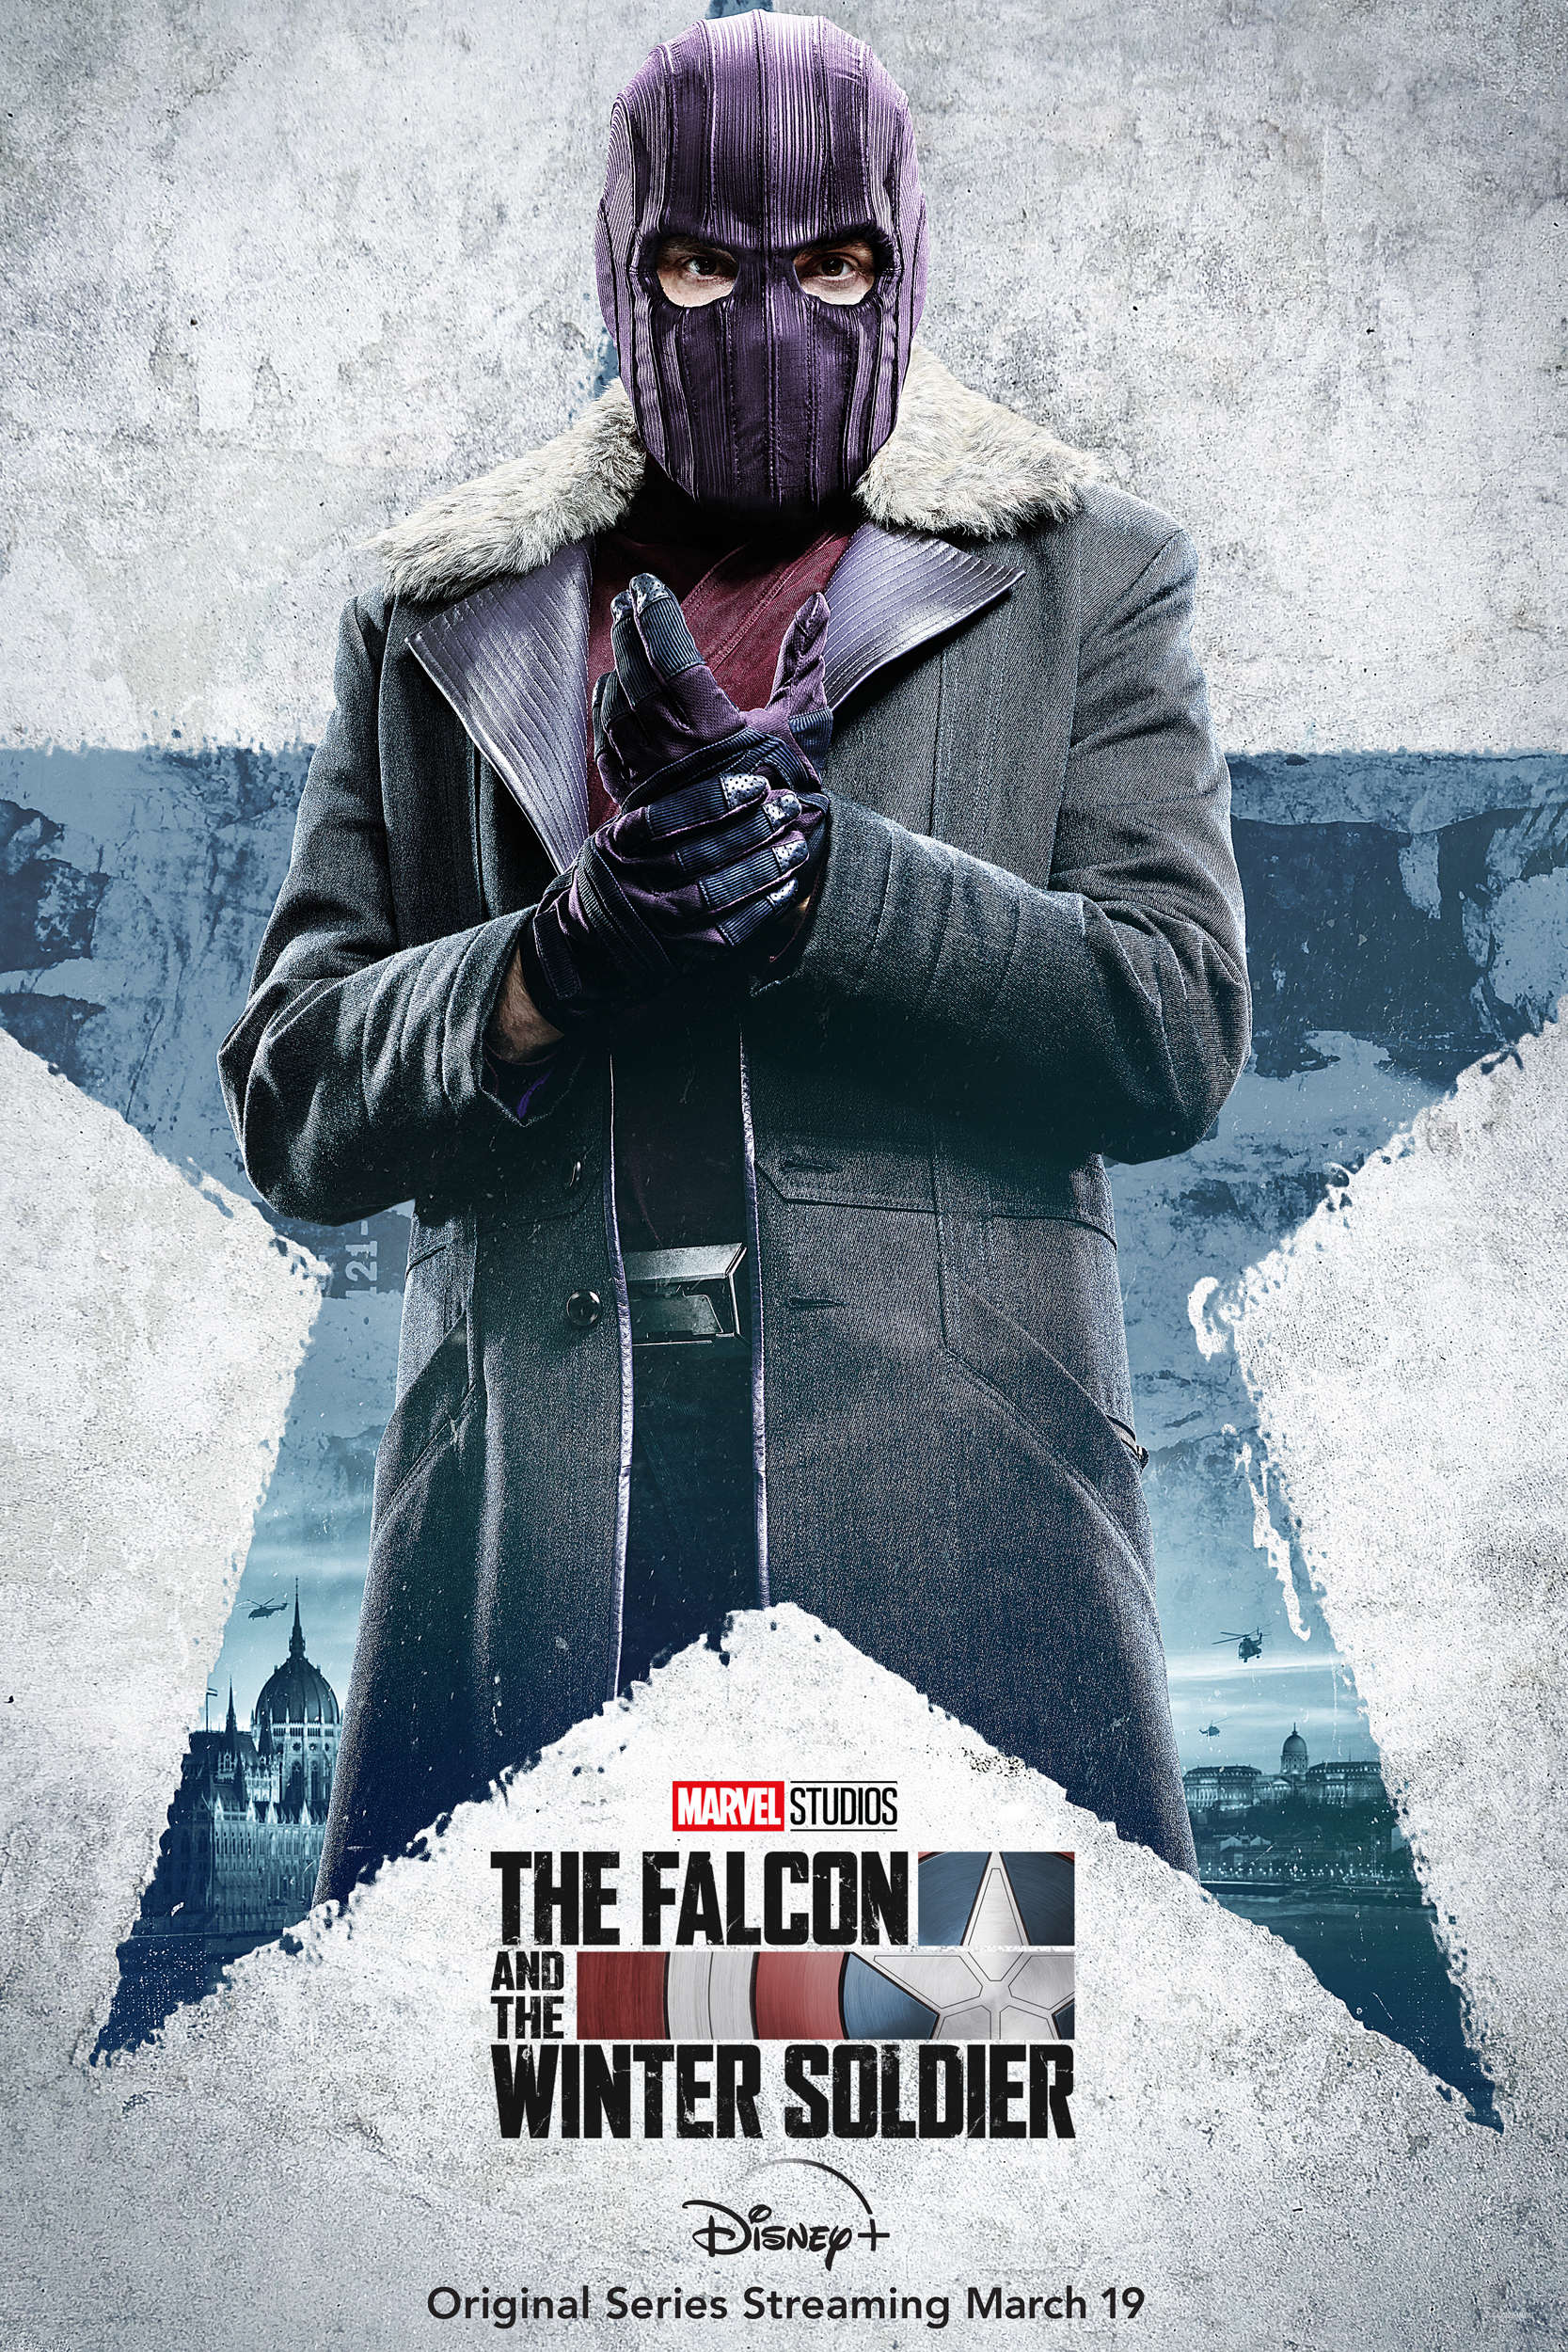 The Falcon and the Winter Soldier Zemo poster